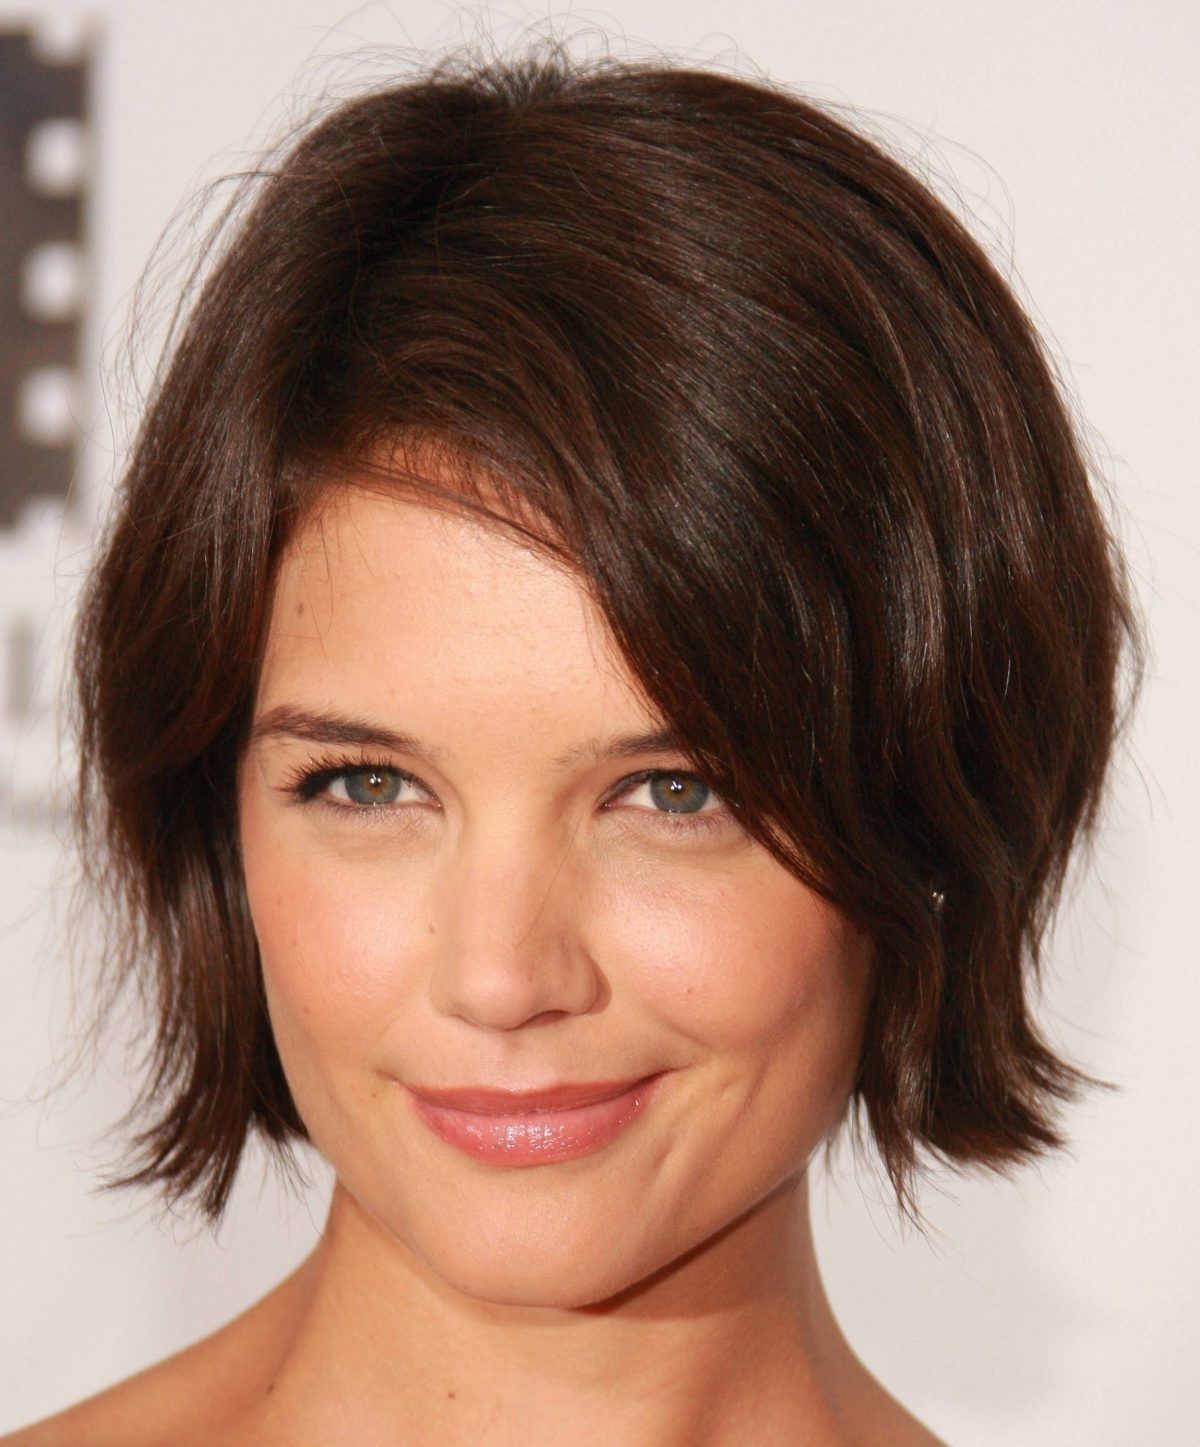 Best Short Hairstyles – Cute Hair Cut Guide For Round Face Shape Intended For Most Up To Date Cute Pixie Hairstyles For Round Faces (View 8 of 15)